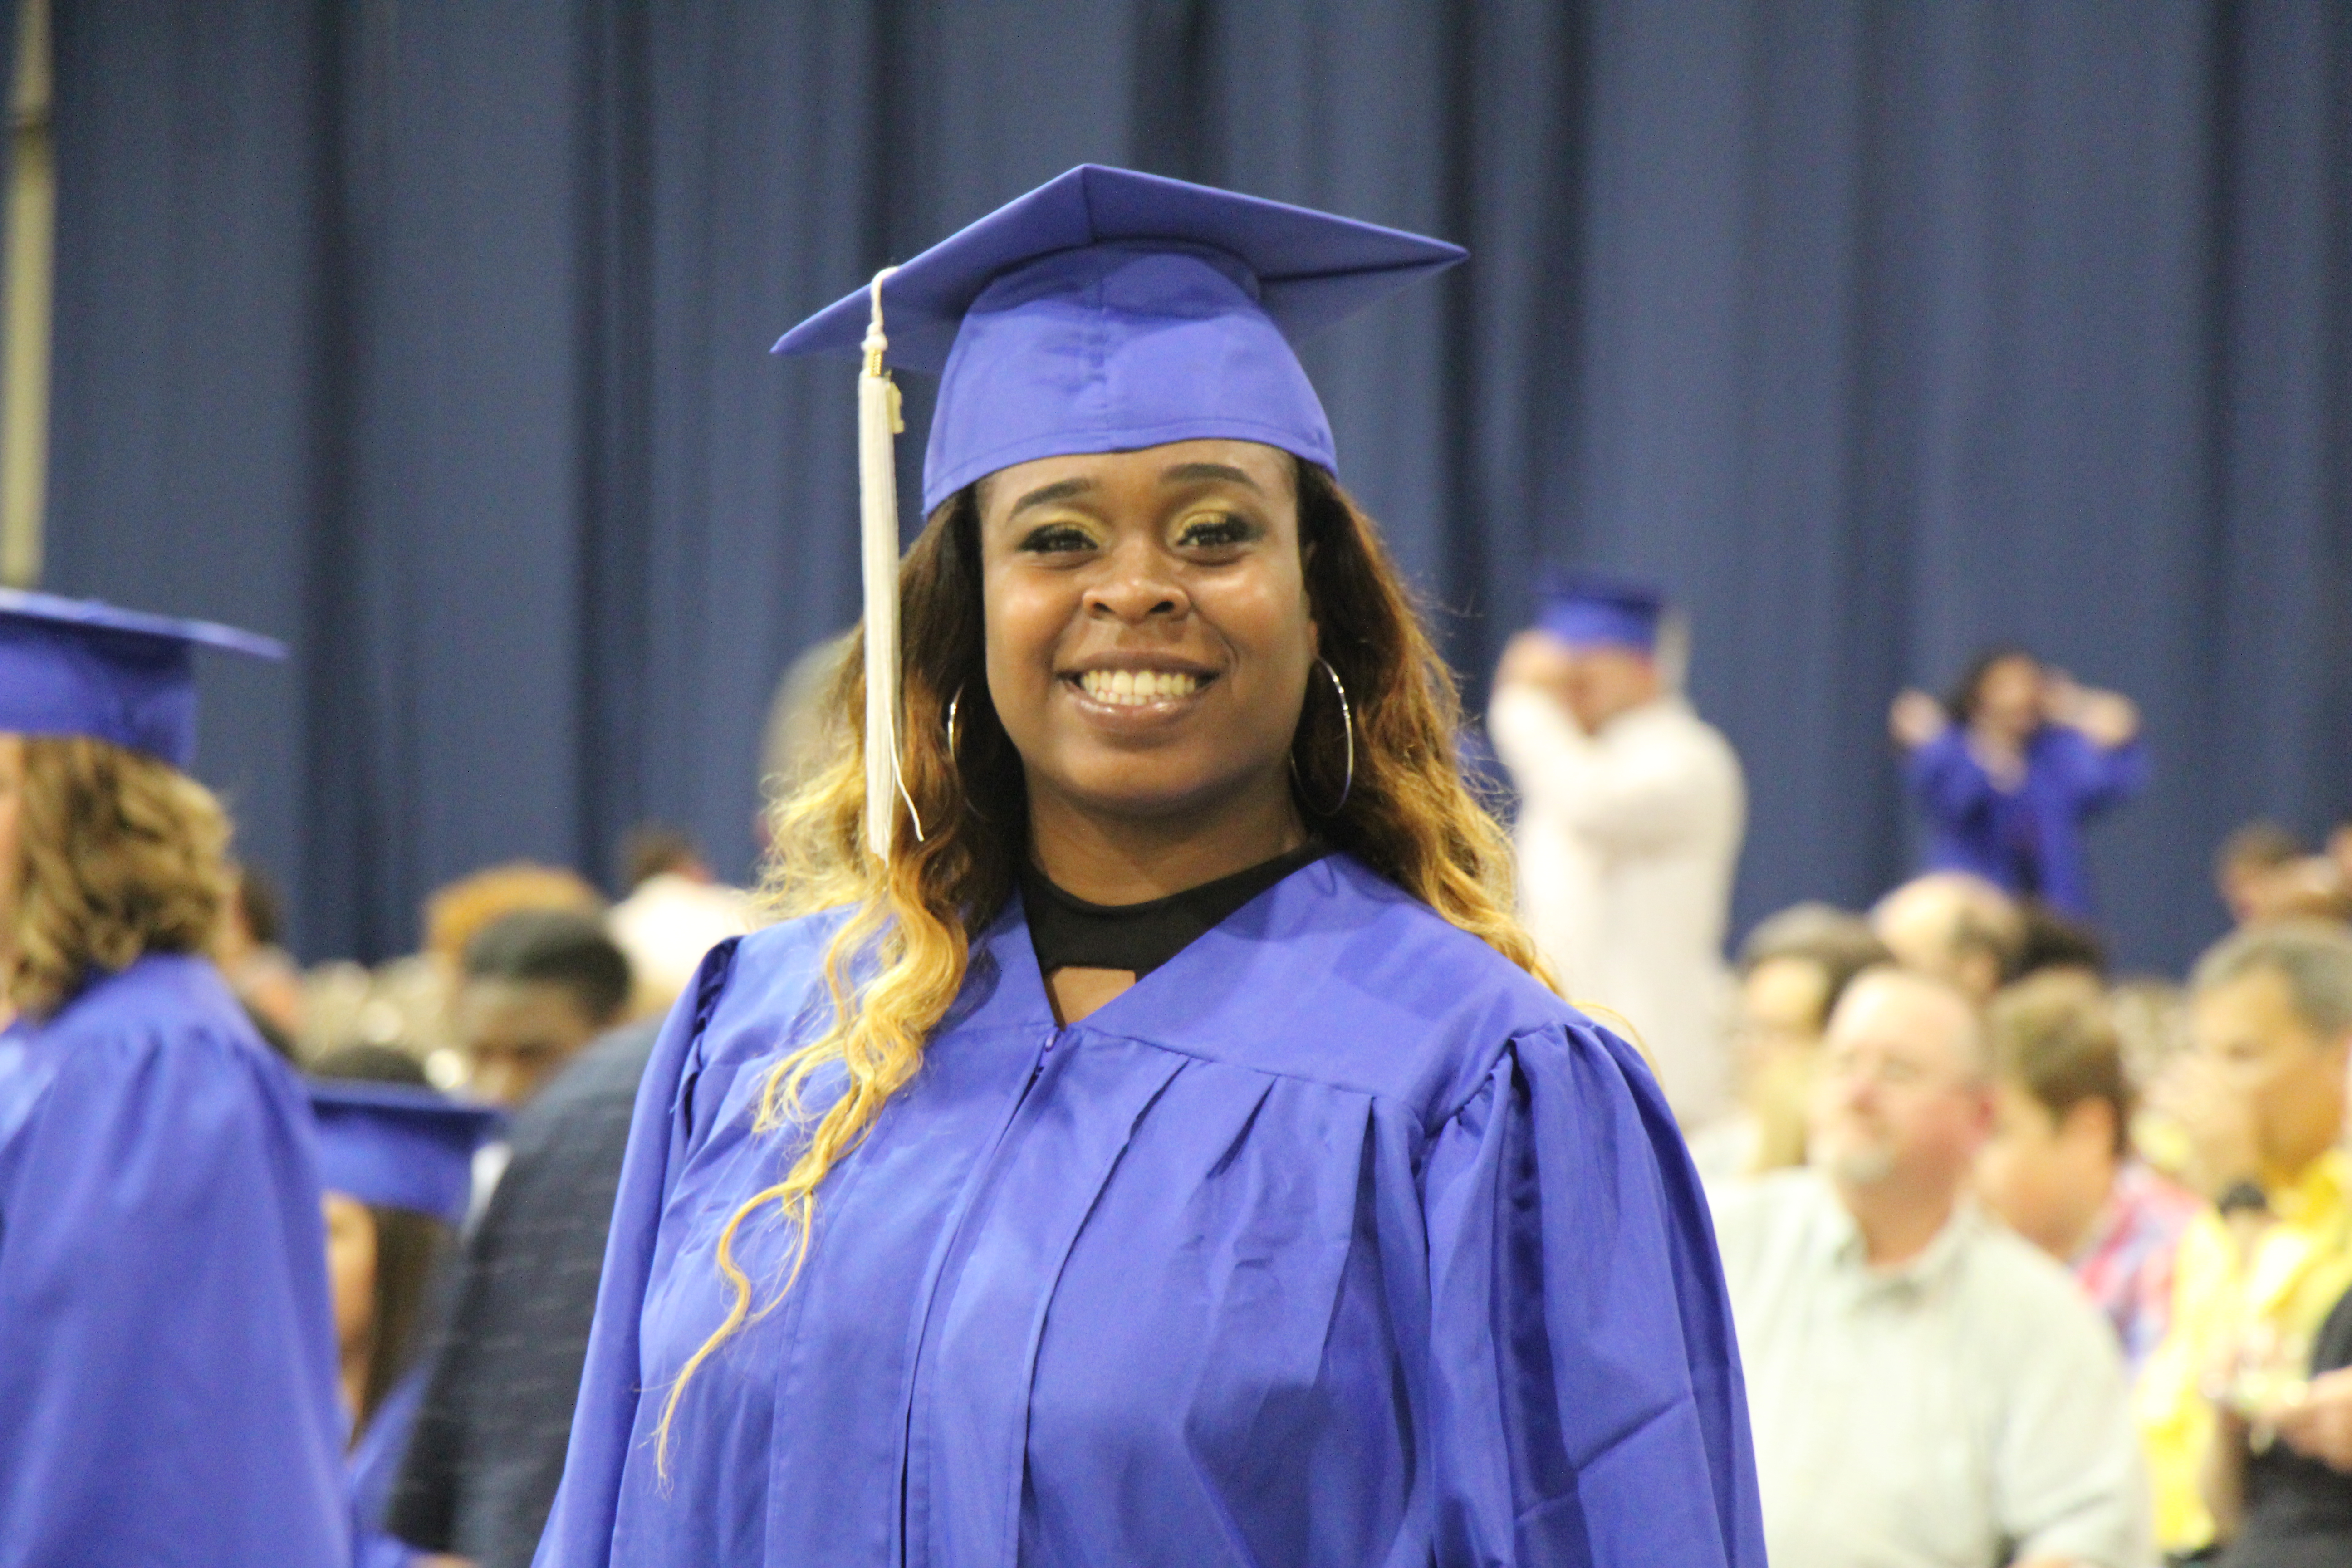 Female in graduation cap and gown smiling at the camera